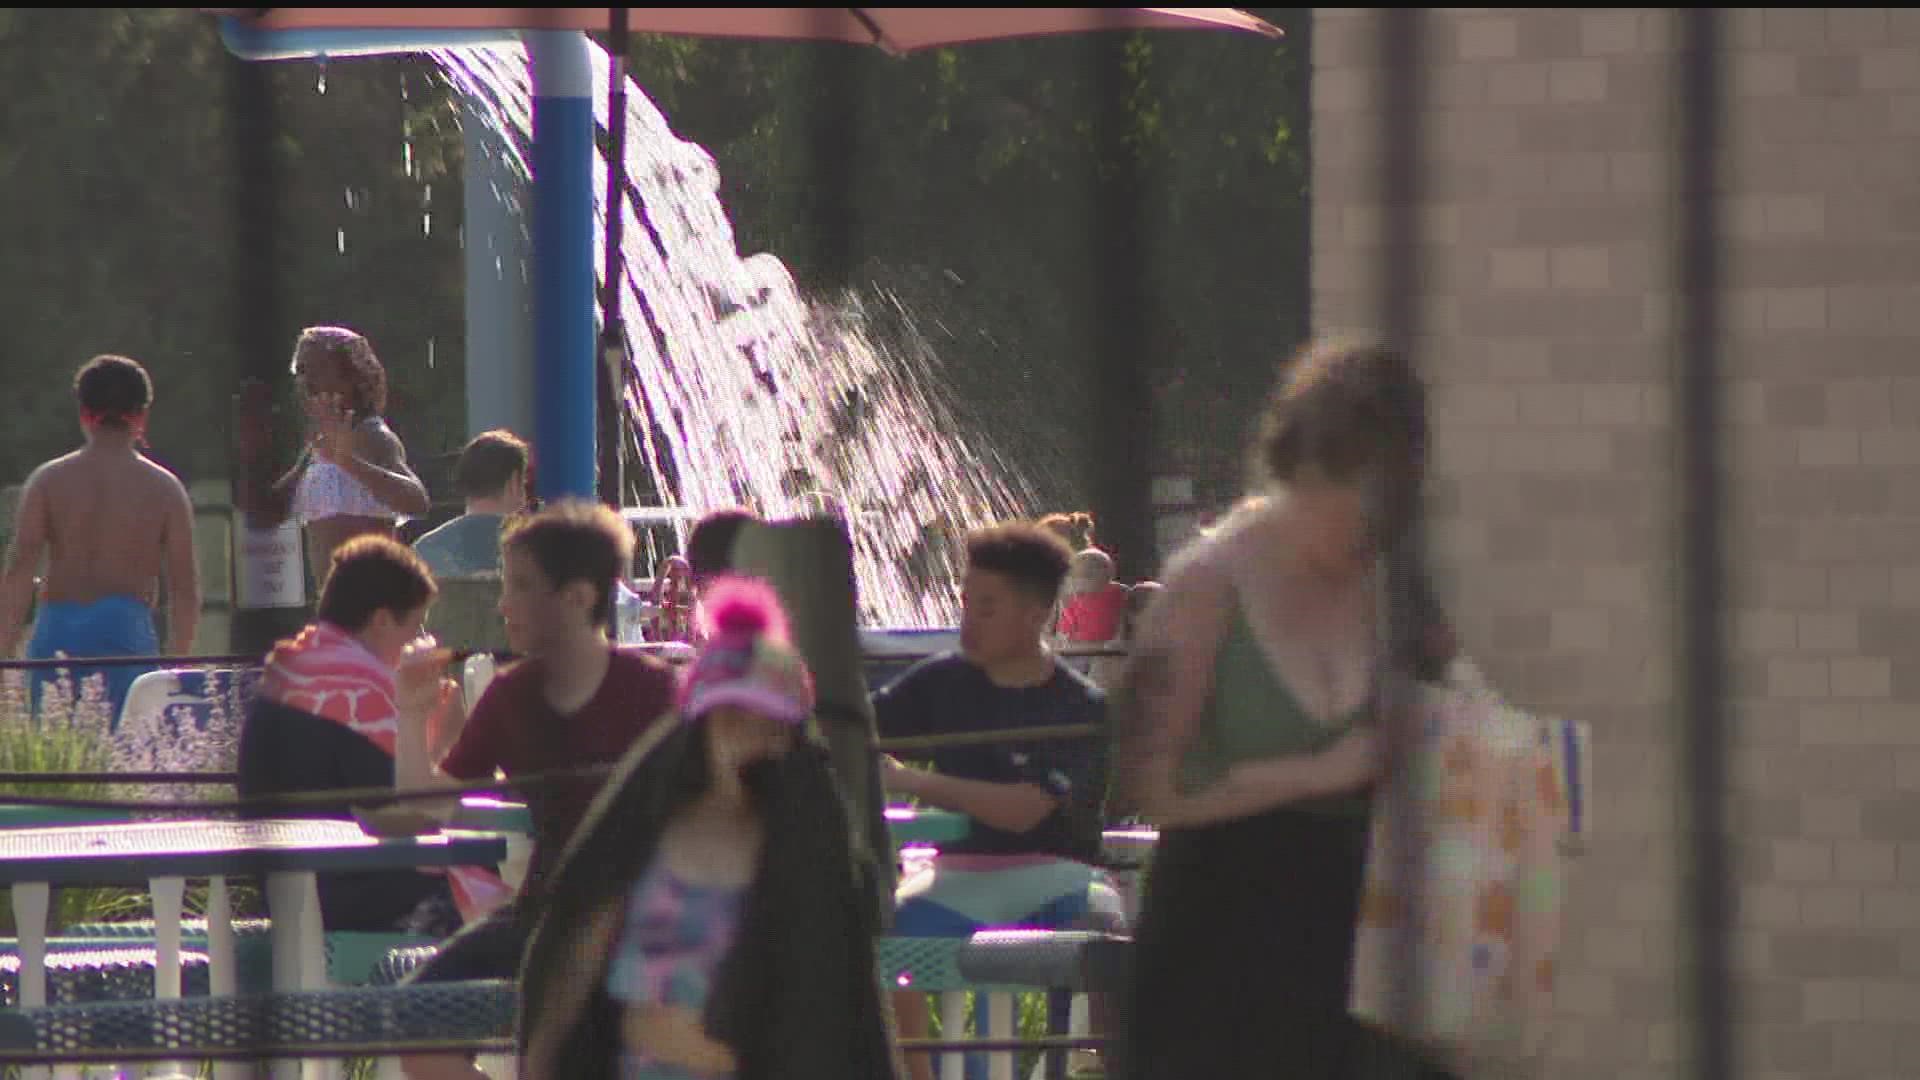 With temperatures forecast to reach in the upper 90s, here's how some local organizers are planning to combat the heat to ensure people can enjoy the outdoors.